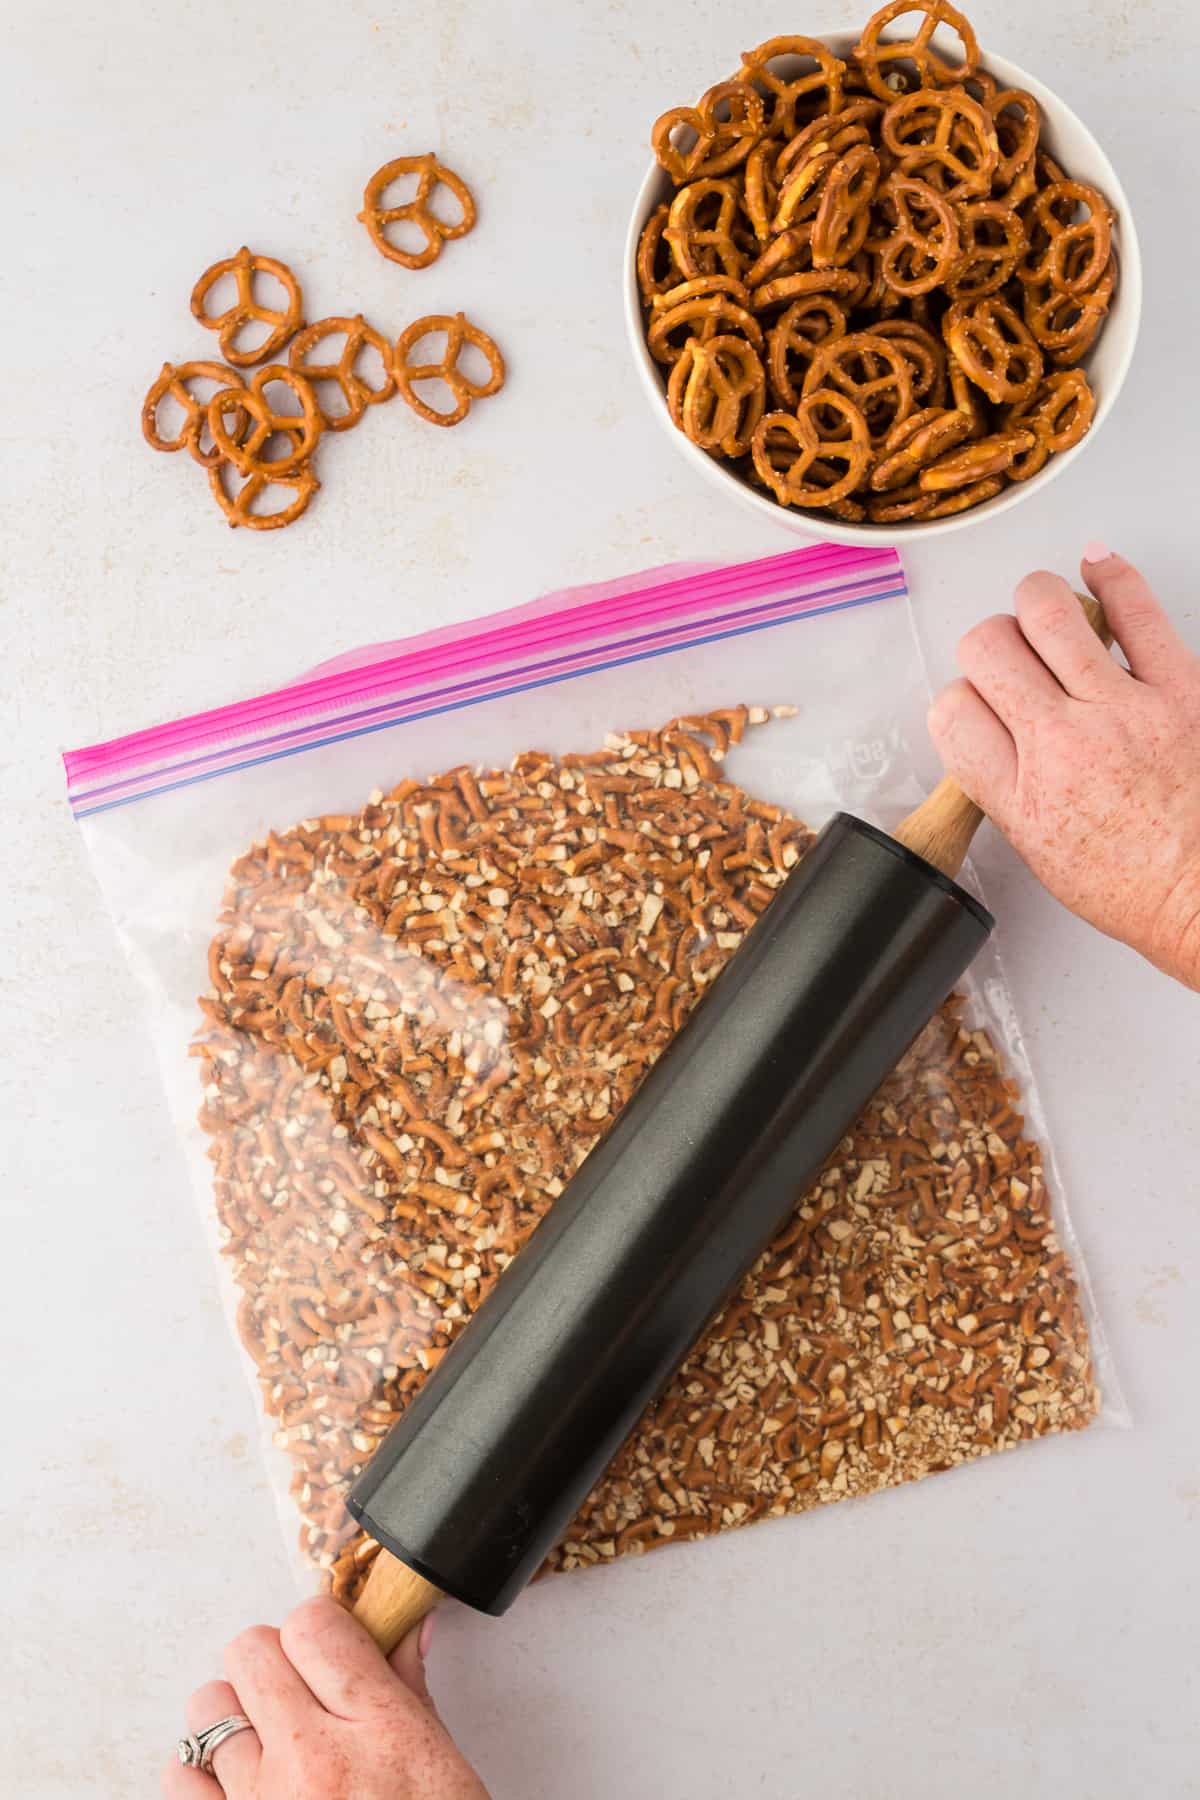 crushing pretzels in a ziploc bag with a rolling pin, with a bowl of pretzels beside is